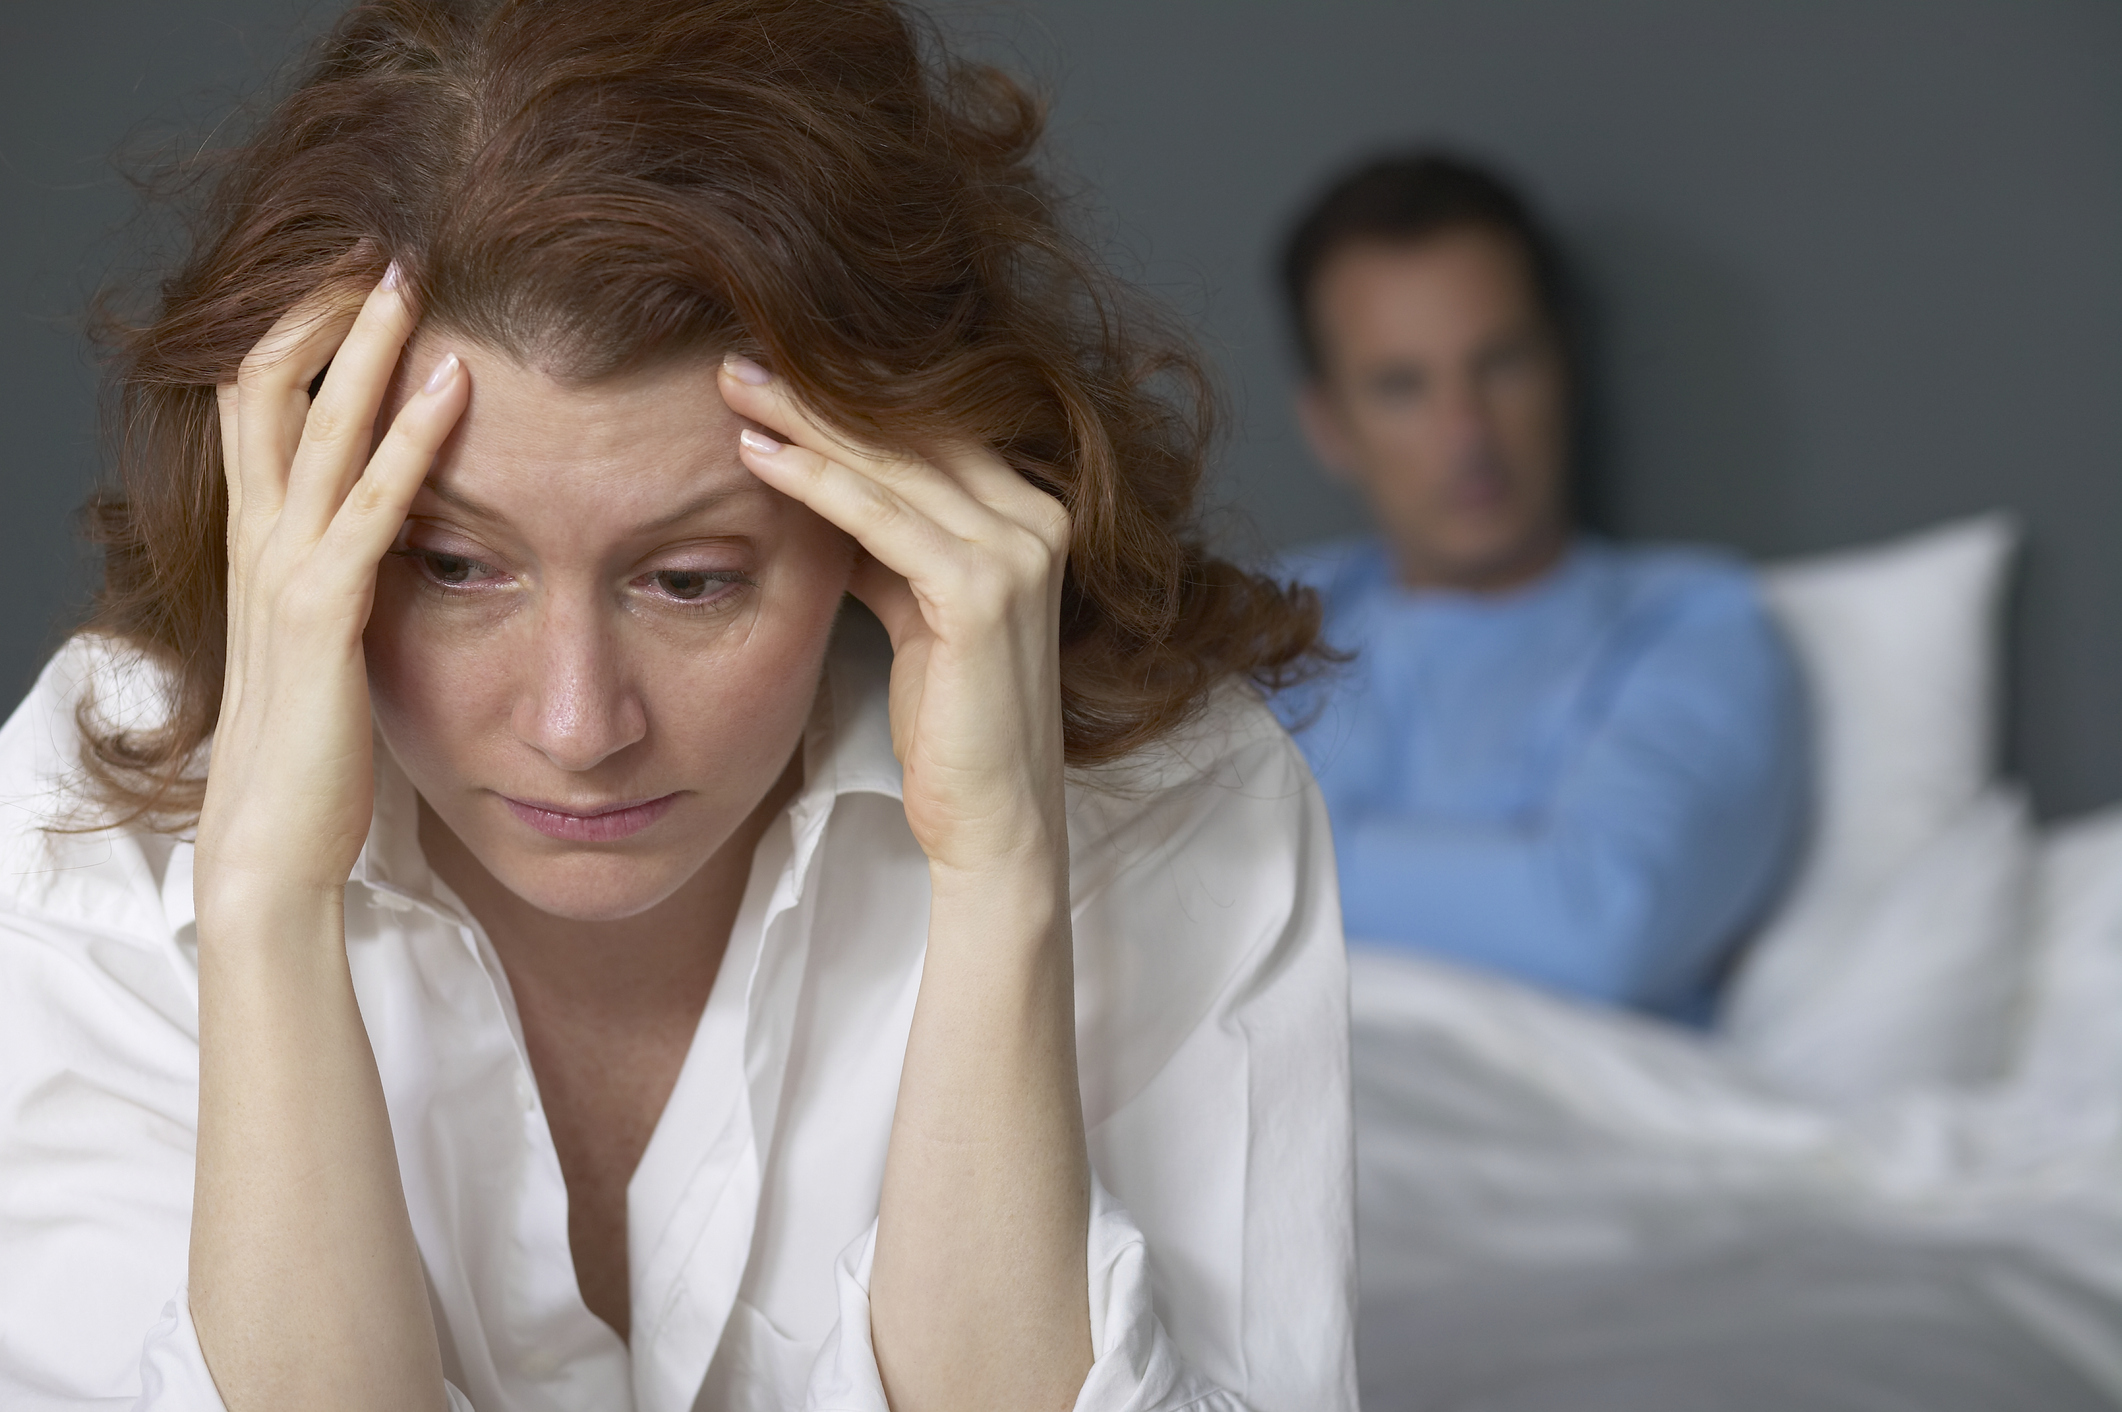 Menopause rage: Let's talk about the link between menopause and divorce